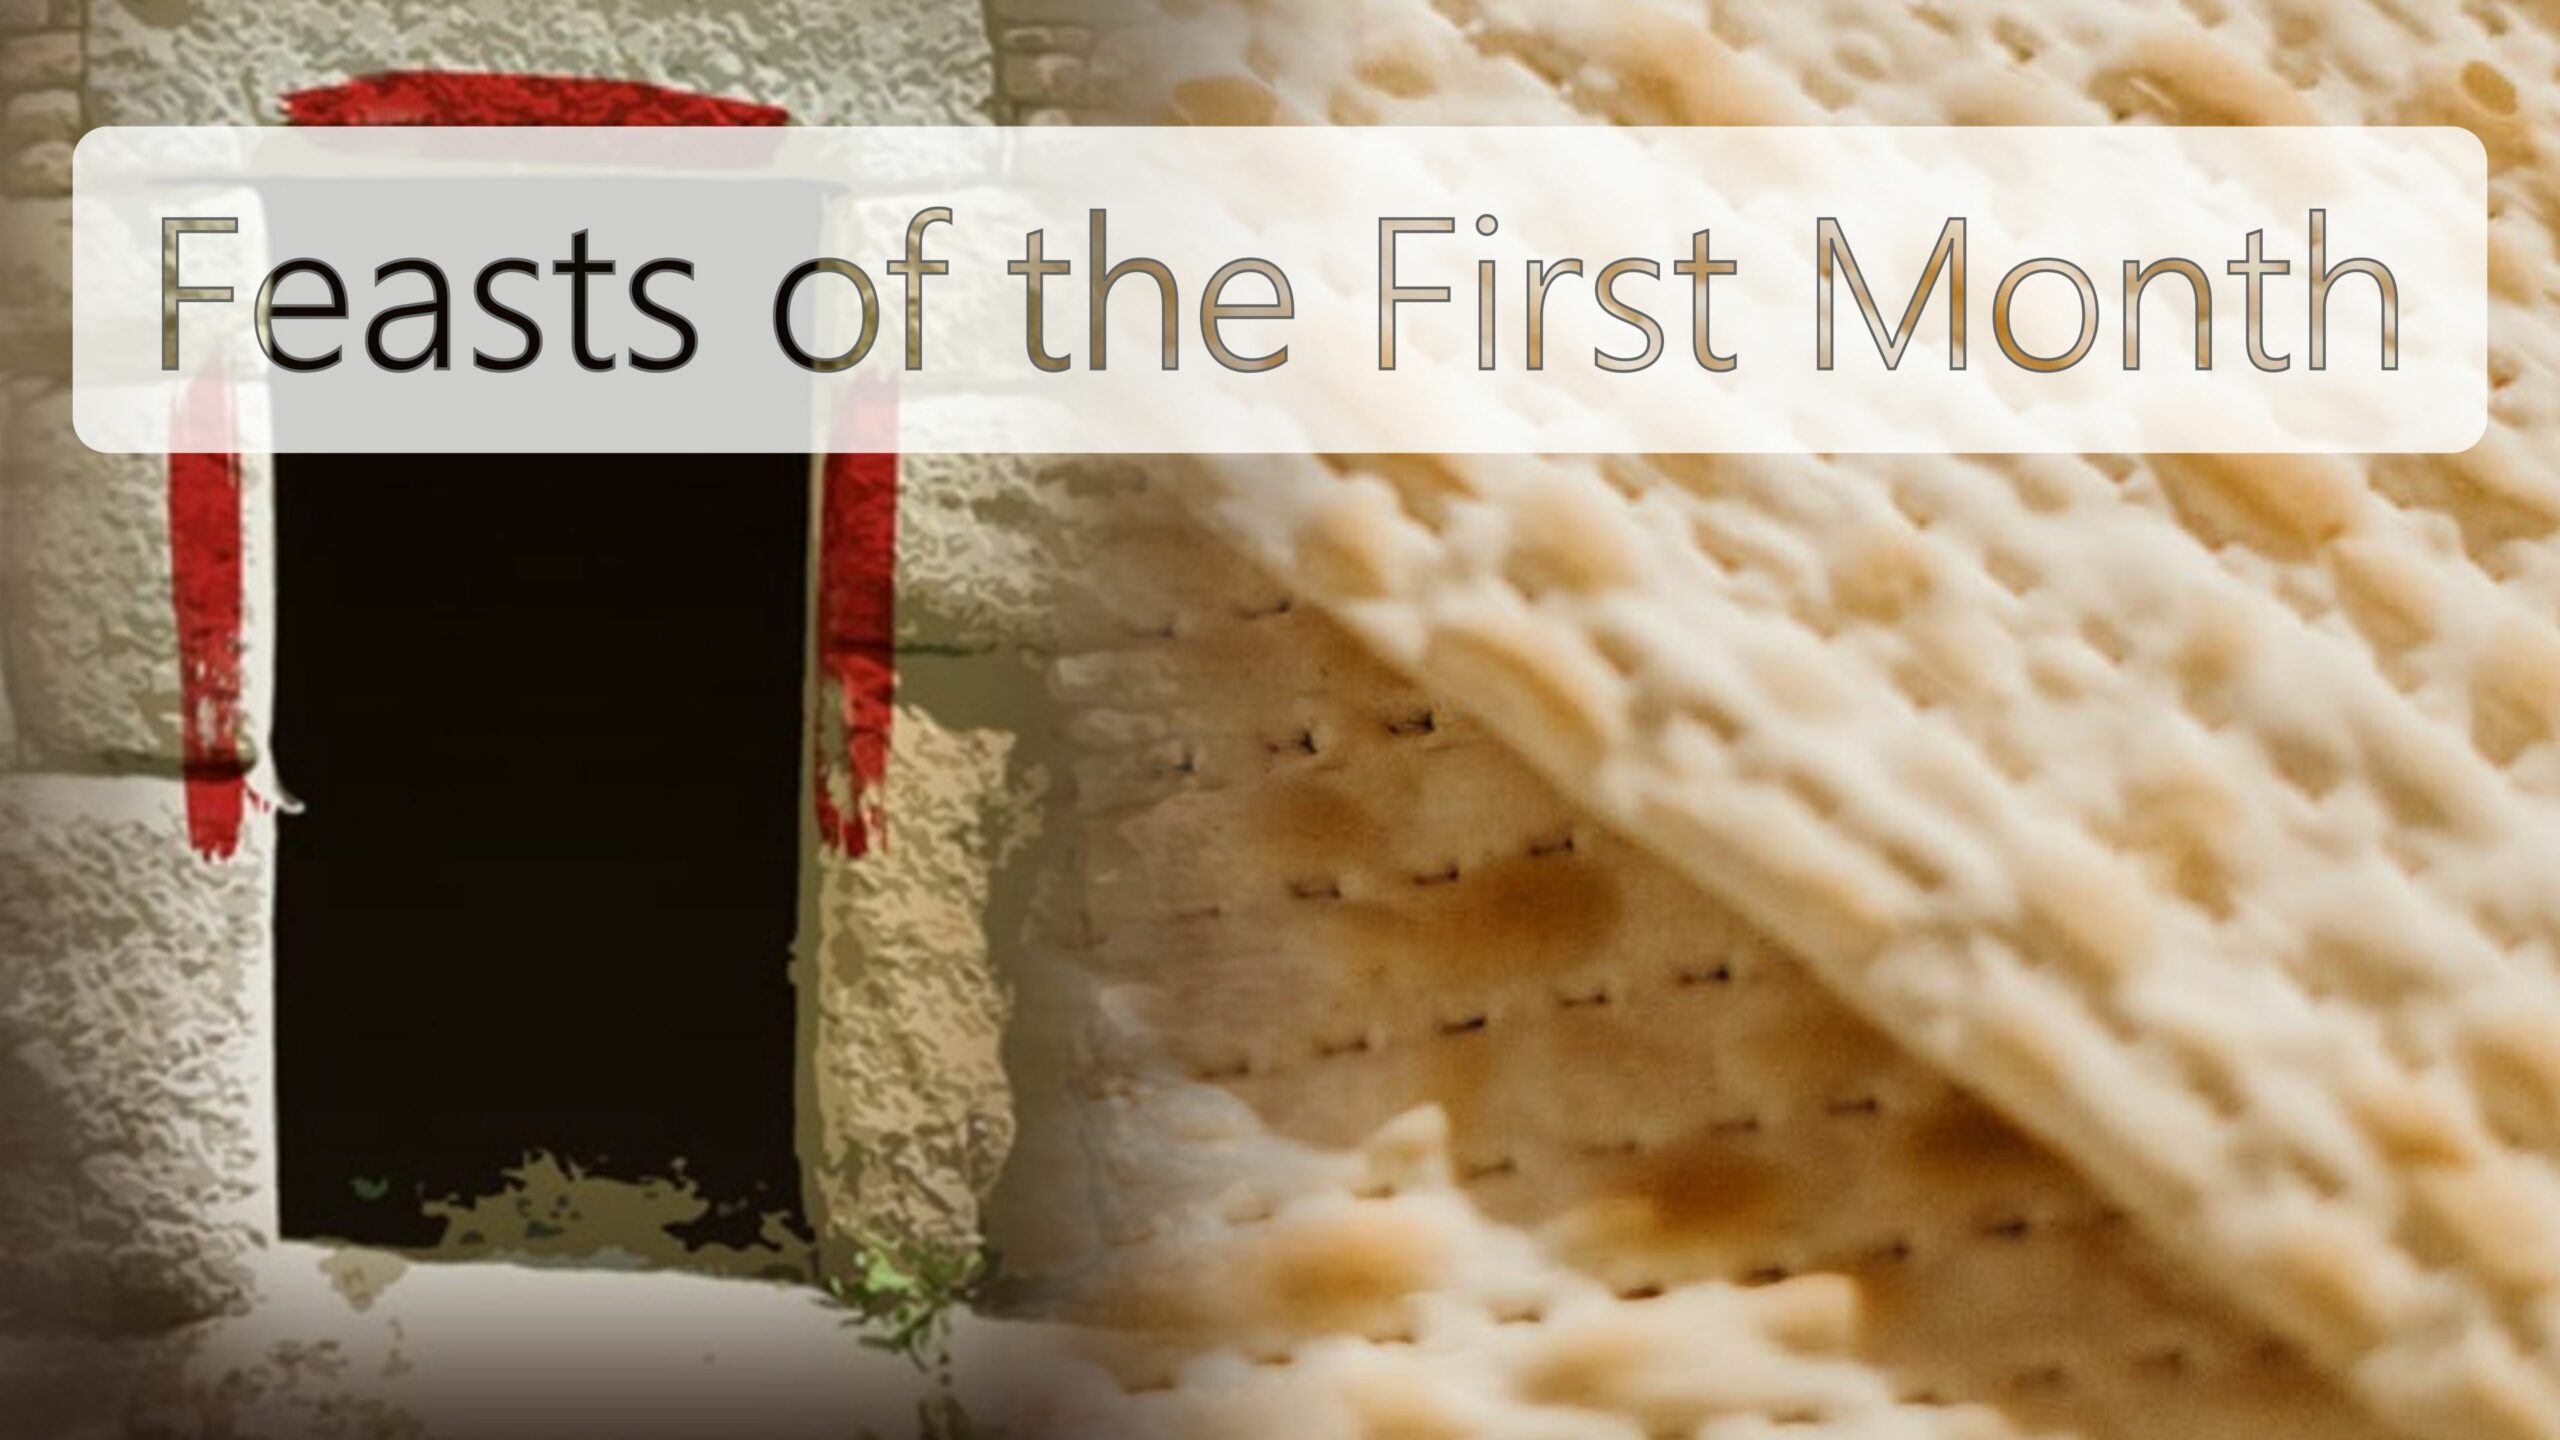 Feasts of the First Month